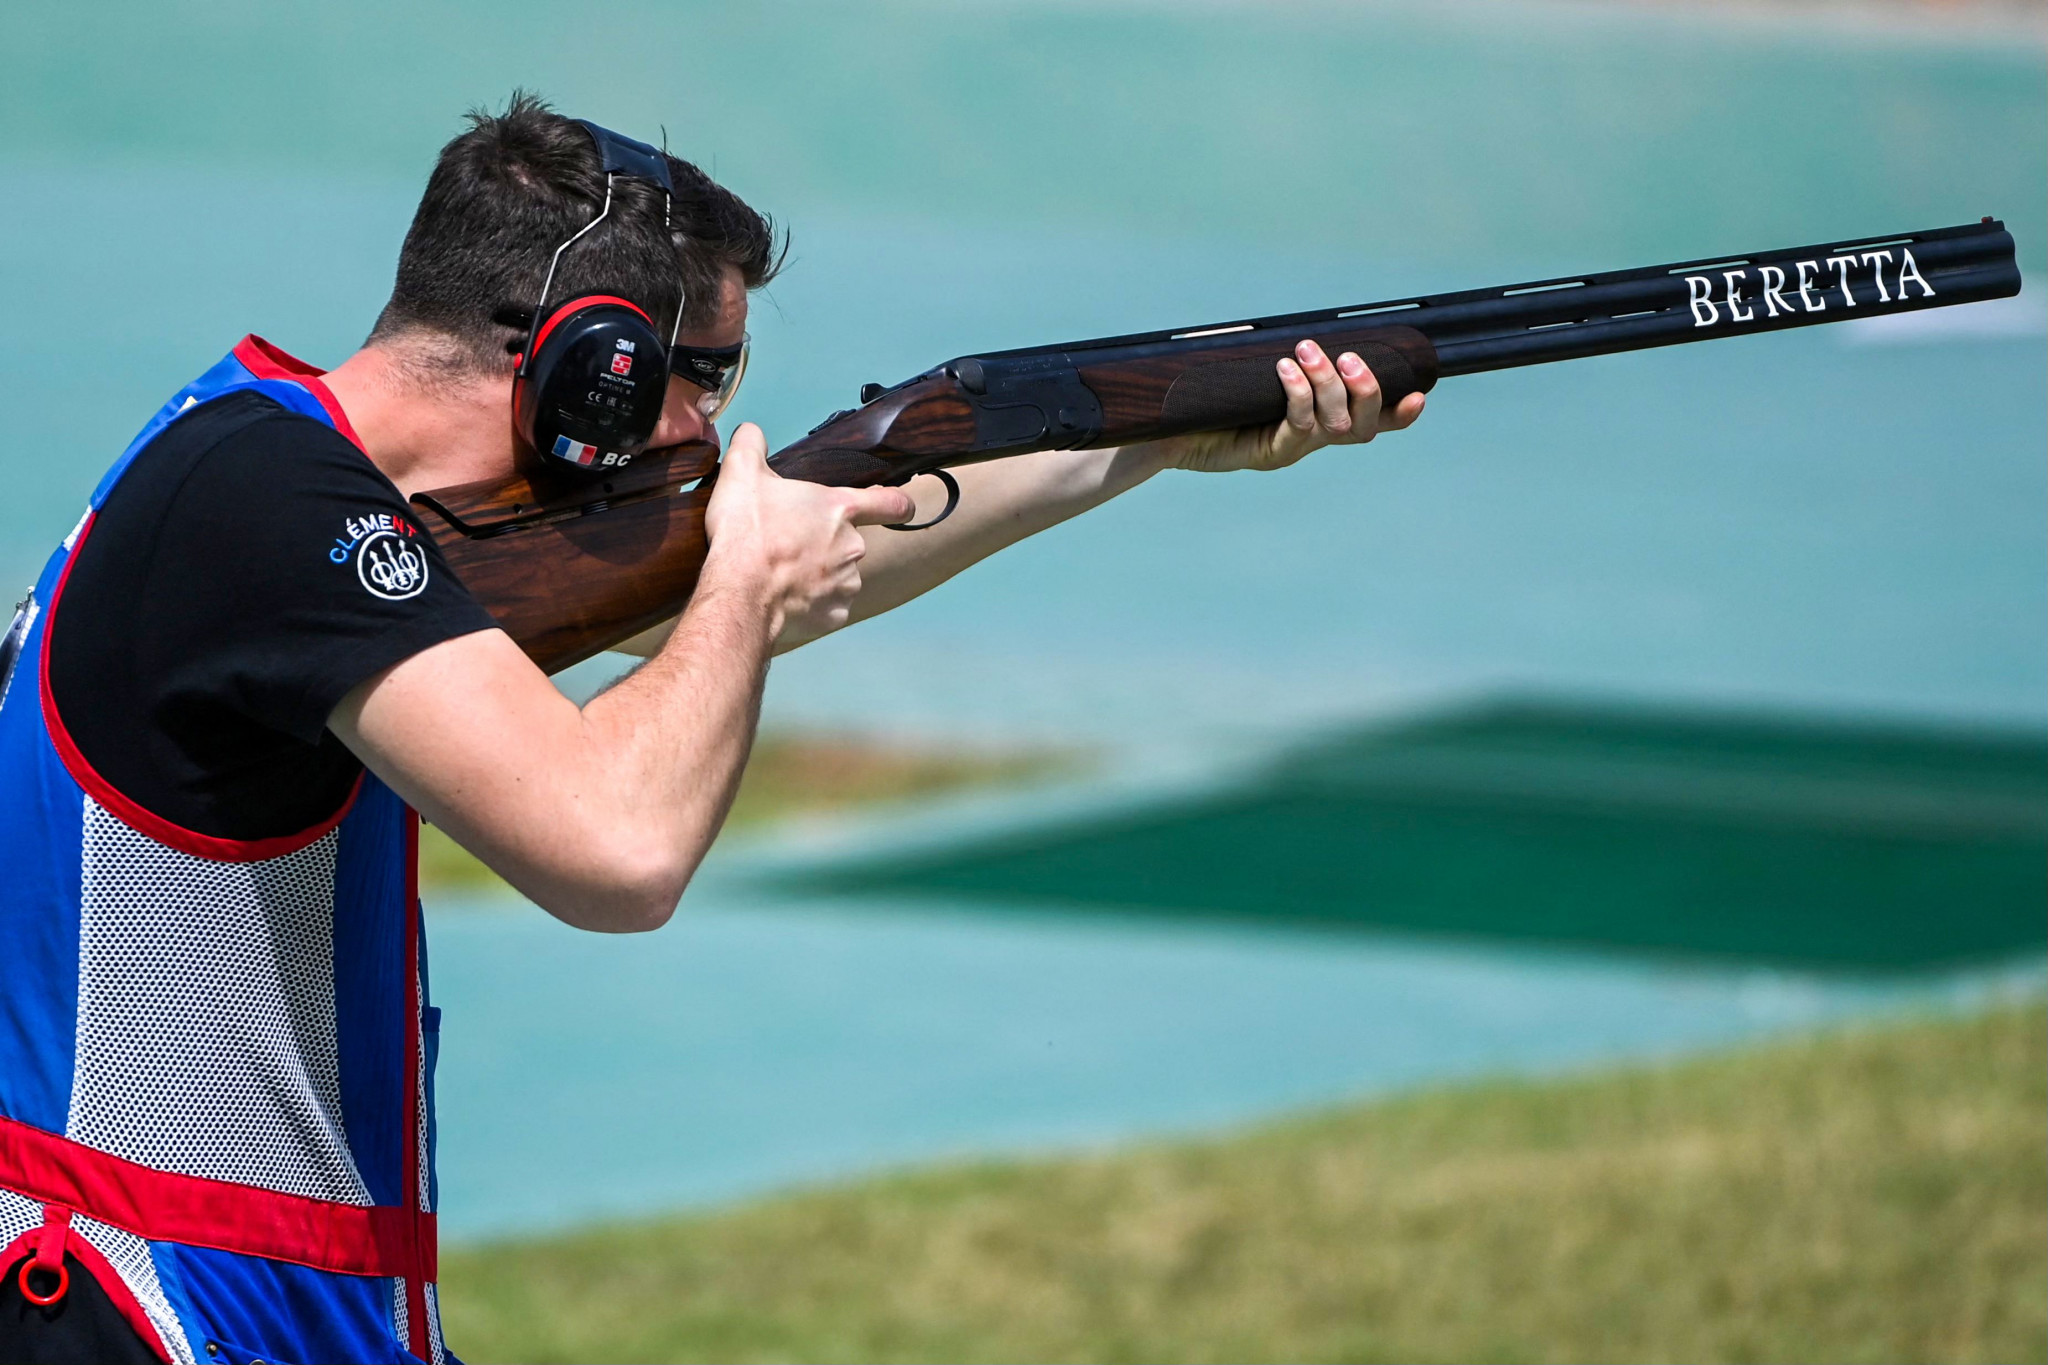 Clement Bourgue scored 49 points after the first two rounds of trap qualification at the ISSF Shotgun World Cup in Nicosia ©Getty Images